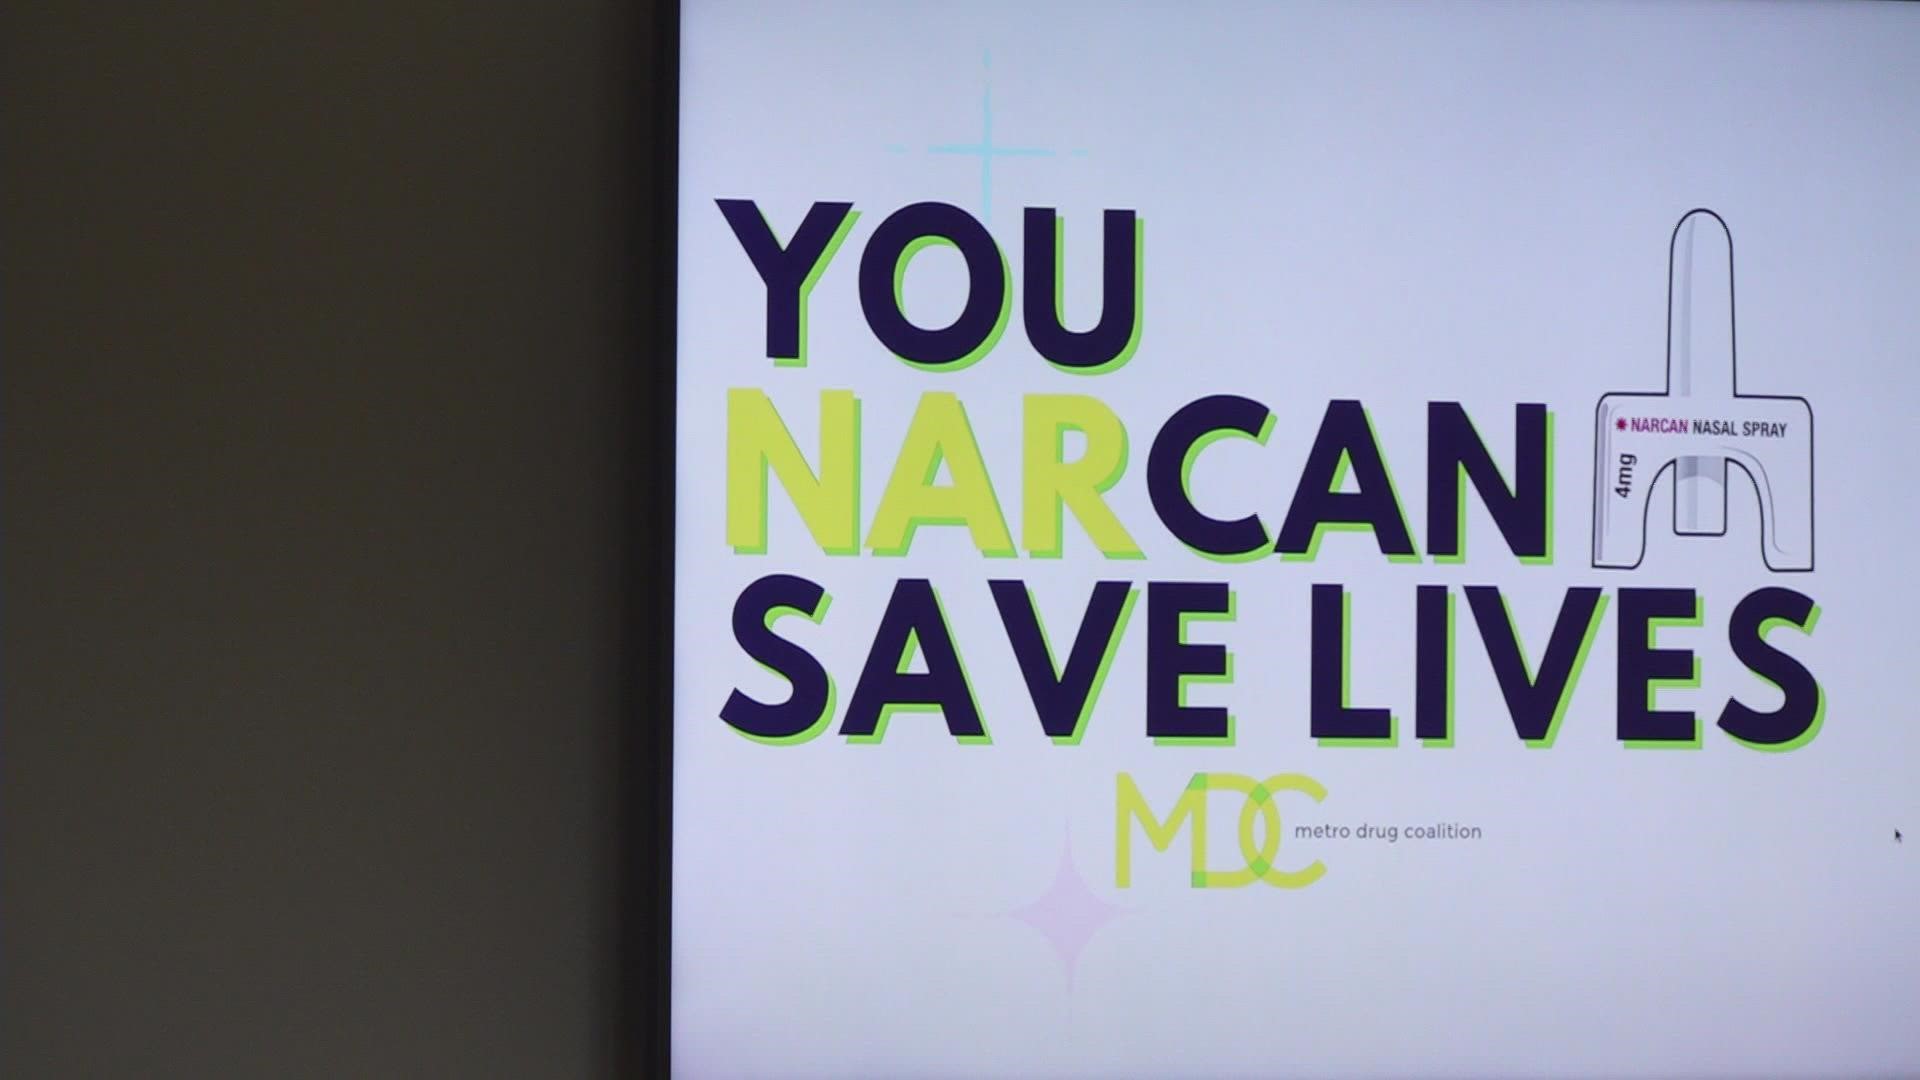 Jessica Stanley has been in recovery for six years. On Tuesday, she held a Narcan training at the Metro Drug Community Coalition meeting.